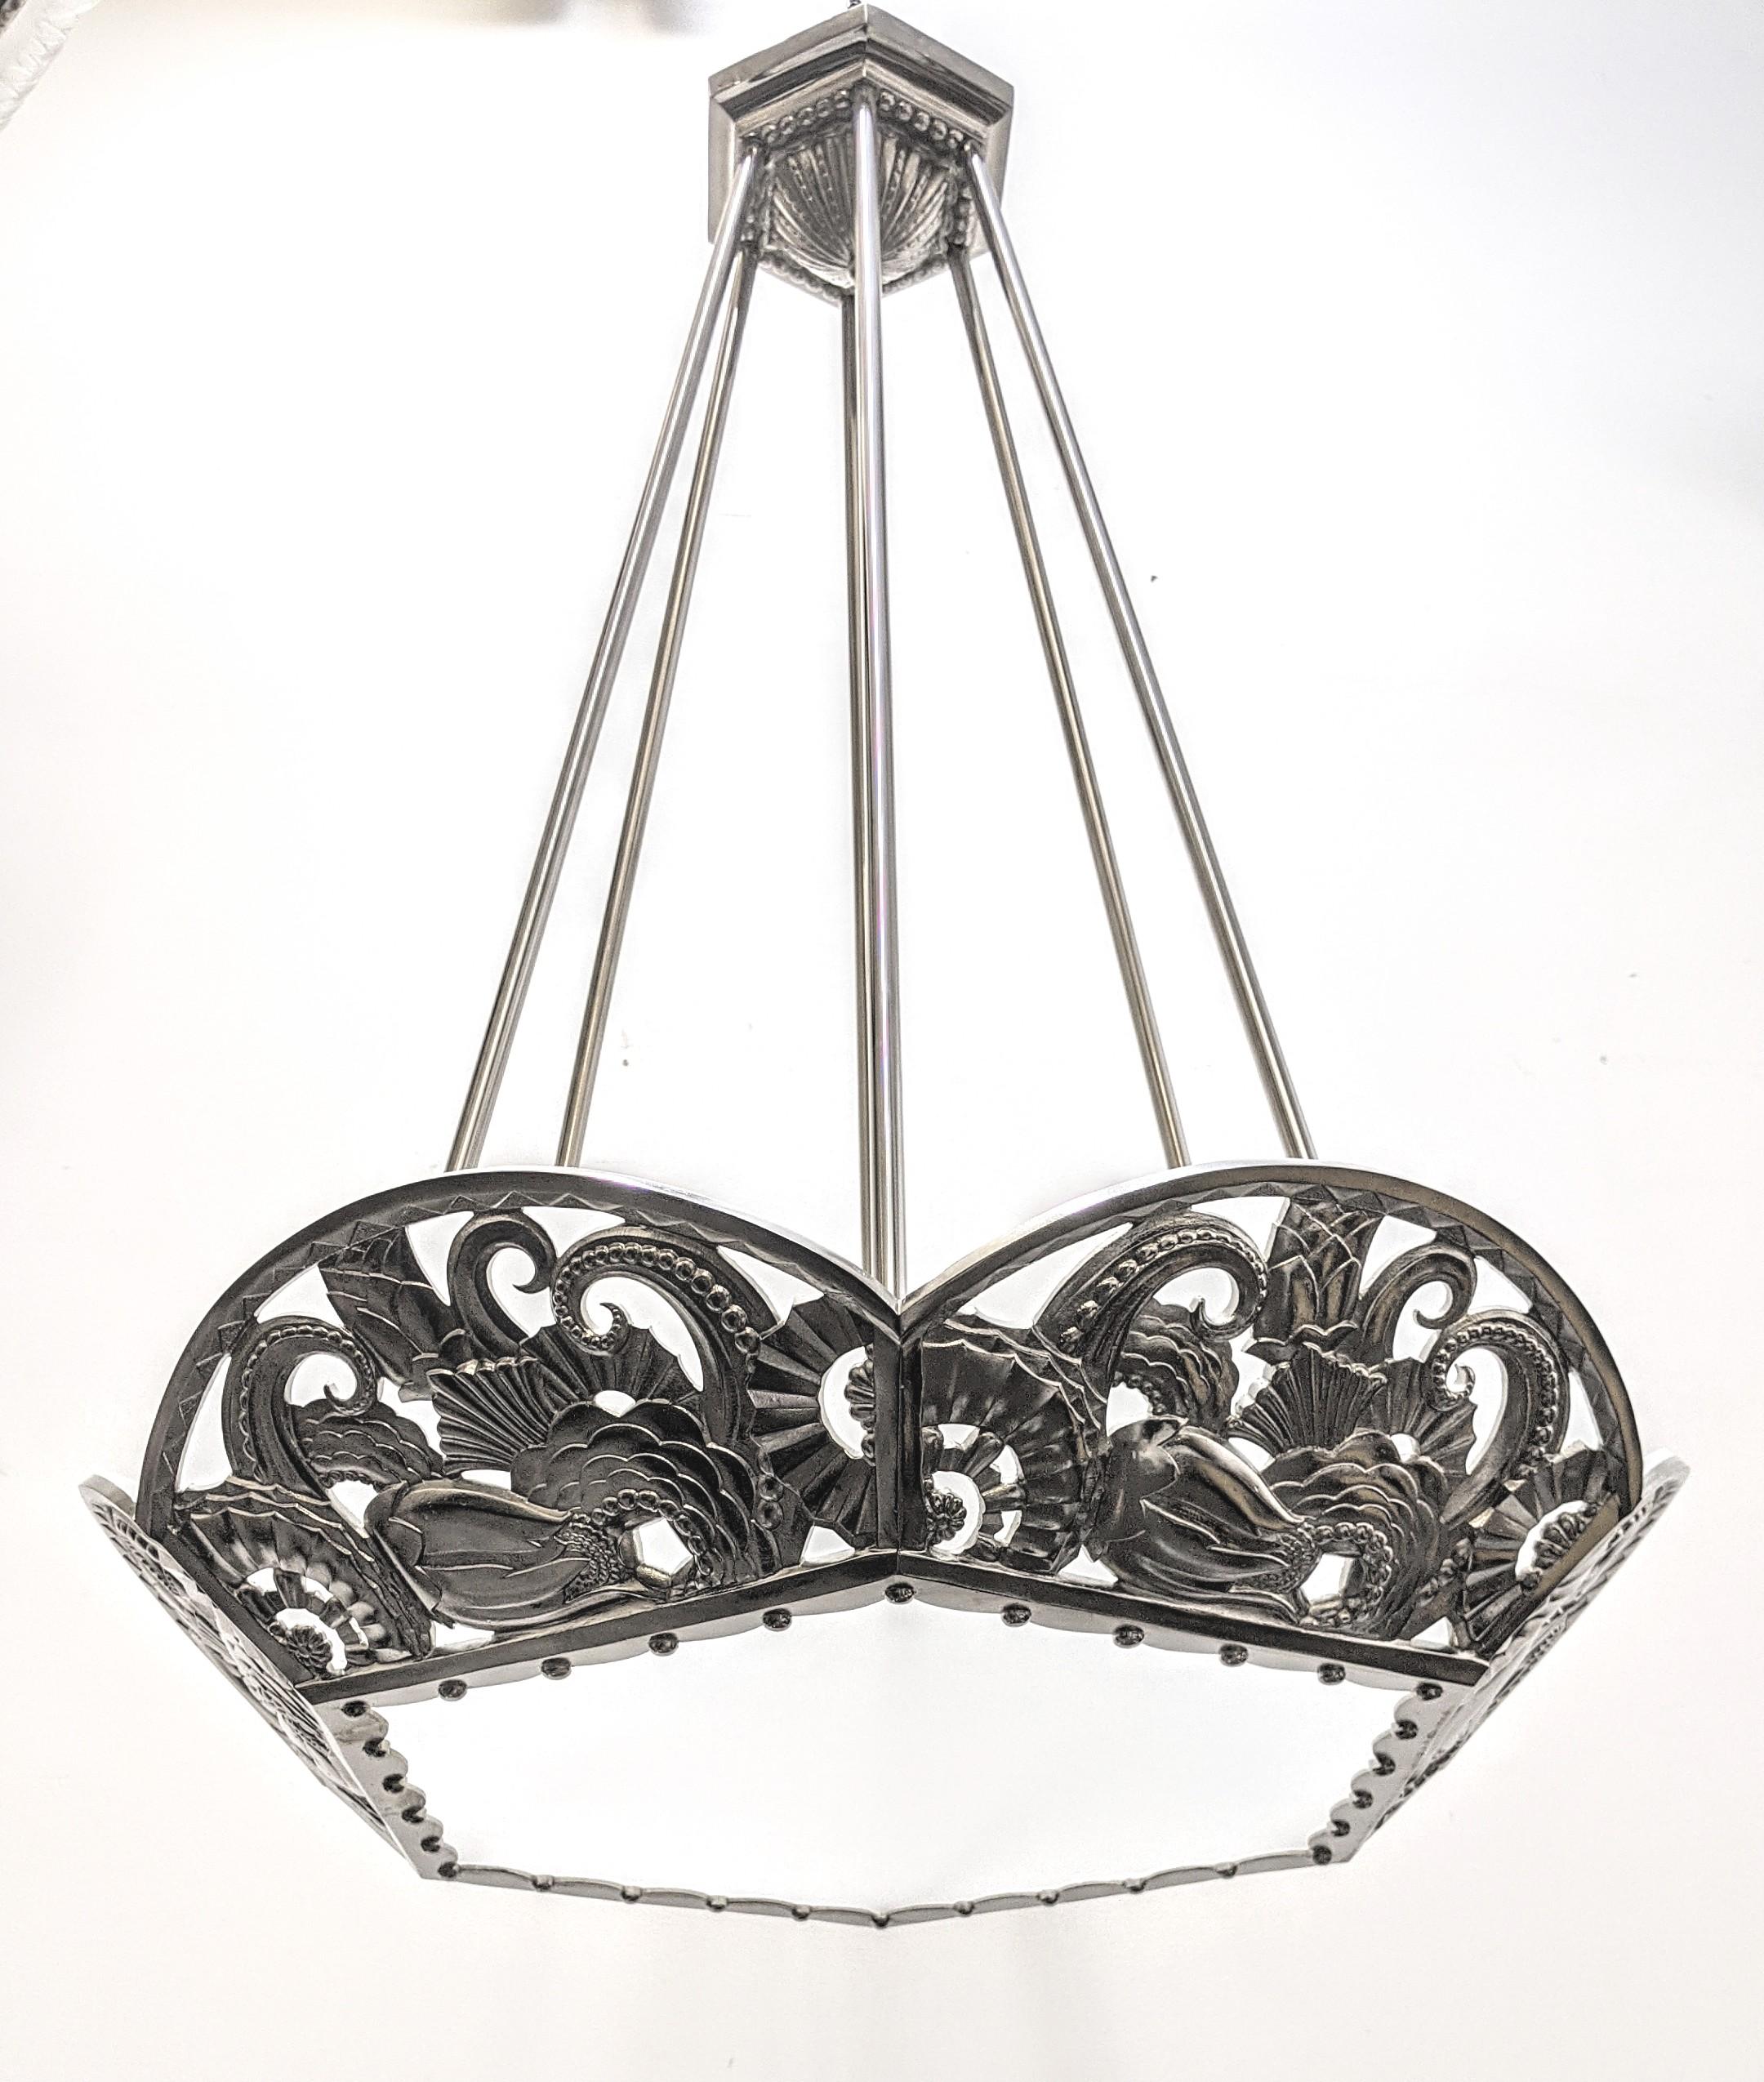 French Art Deco bronze hexagonal-shaped chandelier with multi-dimensional intertwining geometric flower motif details. Each decorative side plack has a flat frosted glass panel encased within, with a matching large center panel. The chandelier has